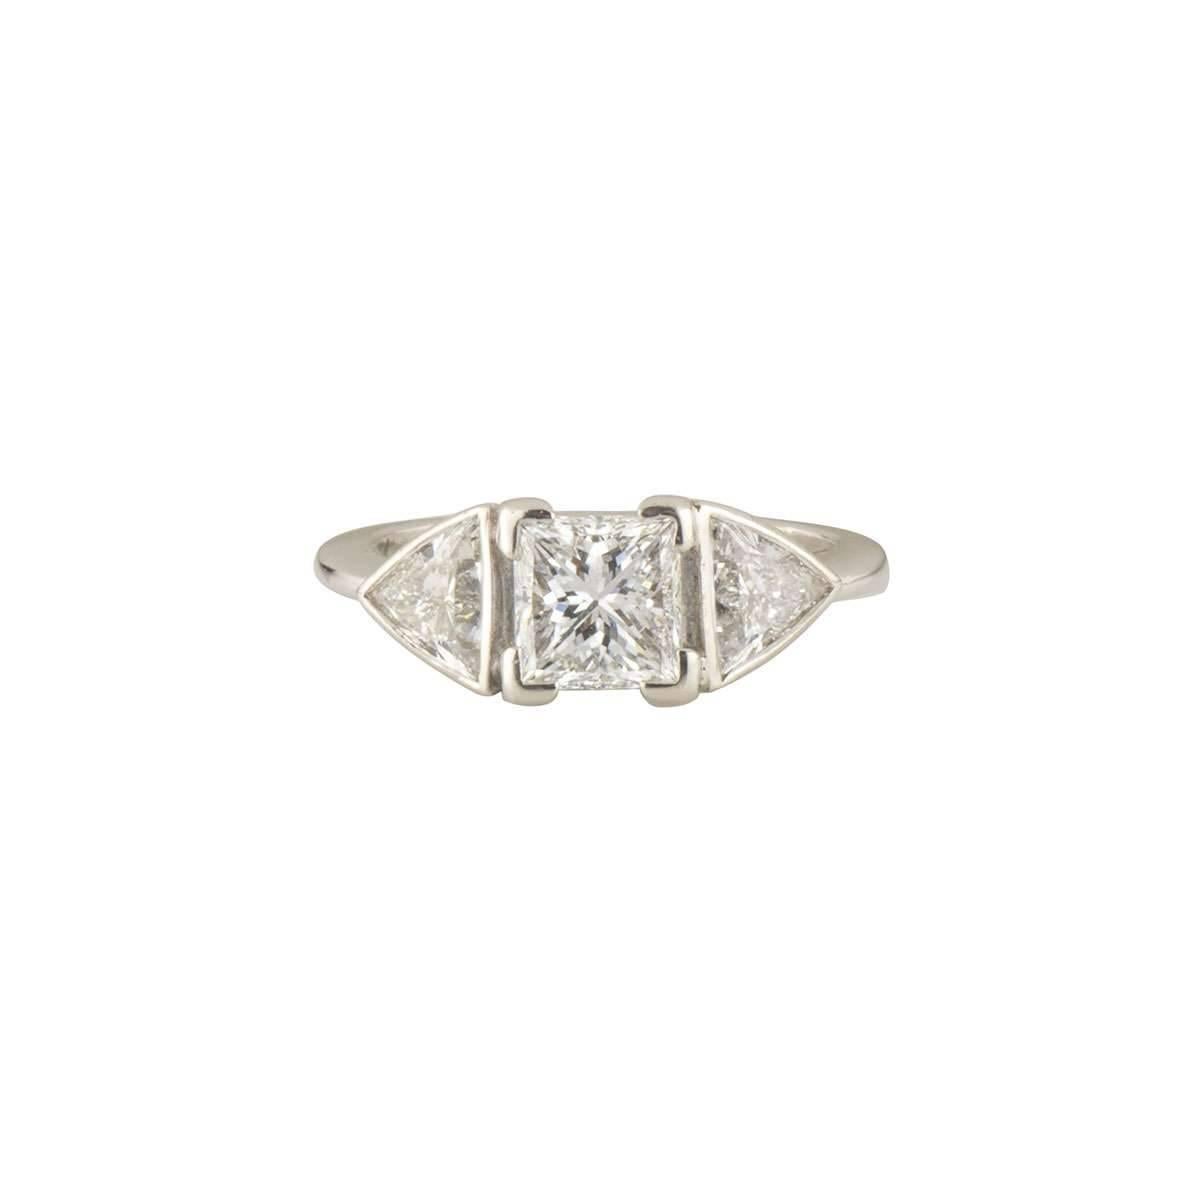 An exquisite 18k white gold diamond ring. The ring comprises of a princess cut diamond with a weight of 1.07ct, predominantly D colour and VS2 clarity. Complementing the central diamond are two trillion cut diamonds set either side with an